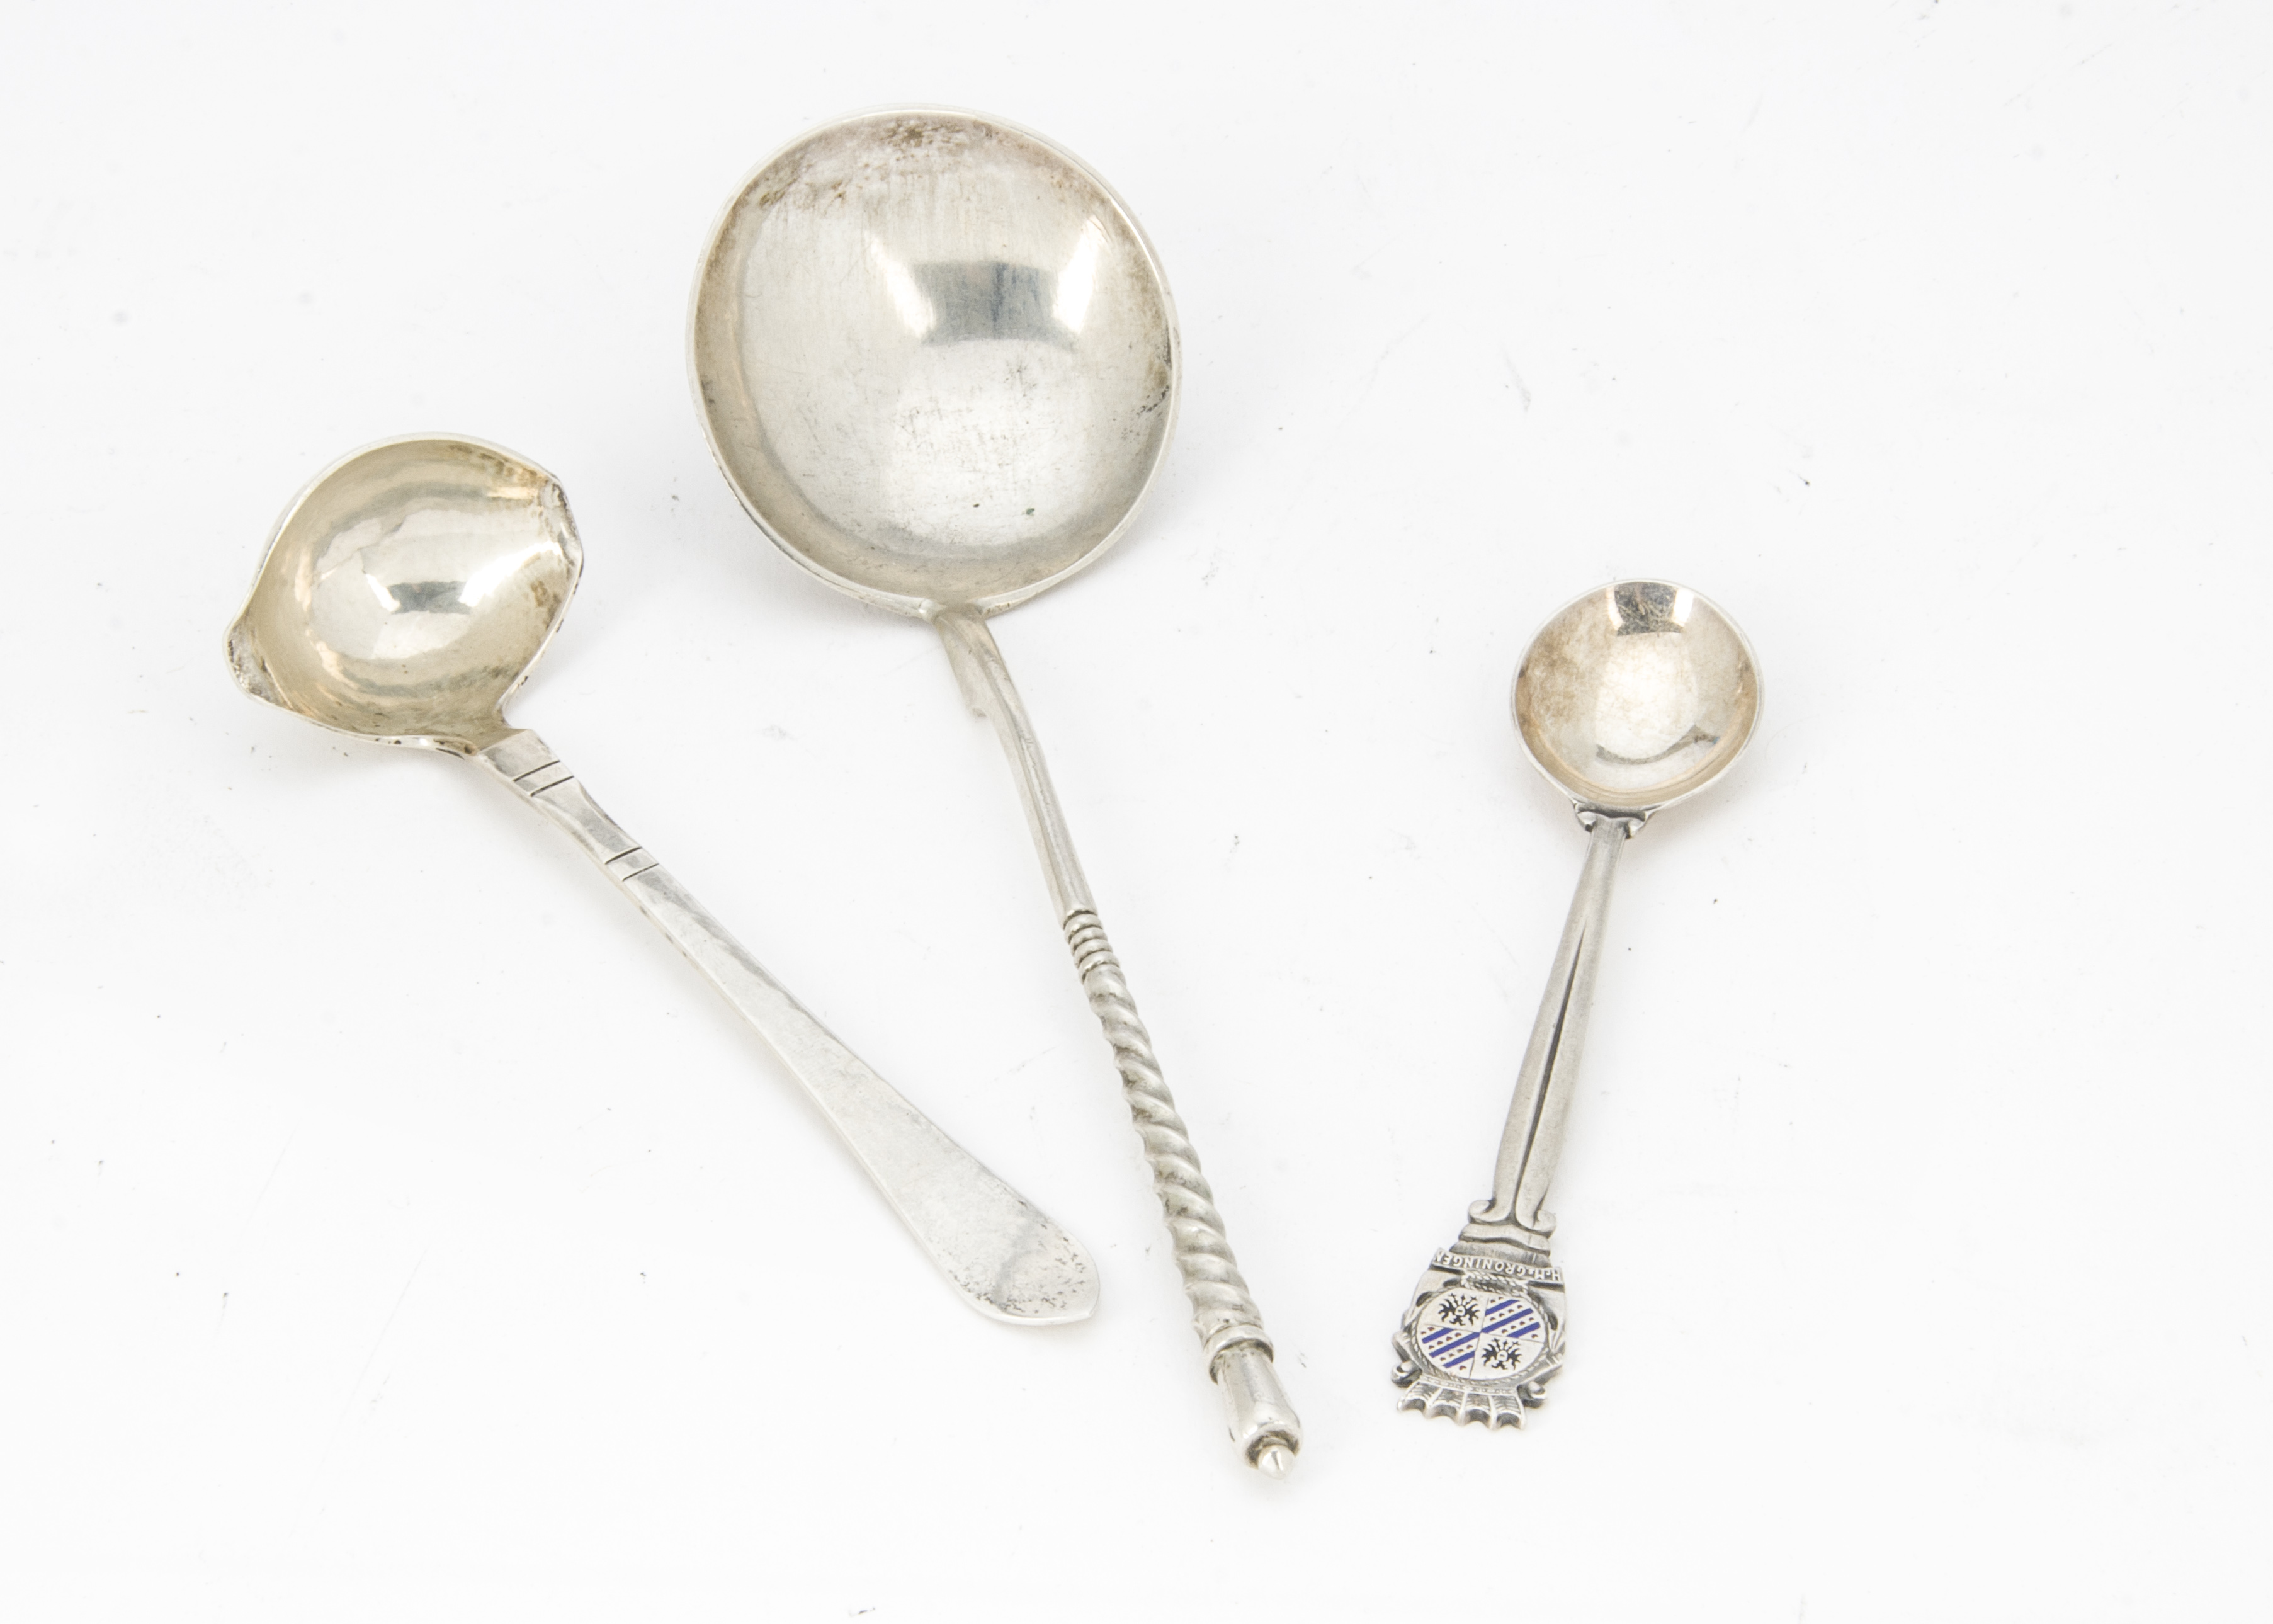 A small Art Deco silver sauce ladle by Georg Jensen, together with a Russian silver spoon and a